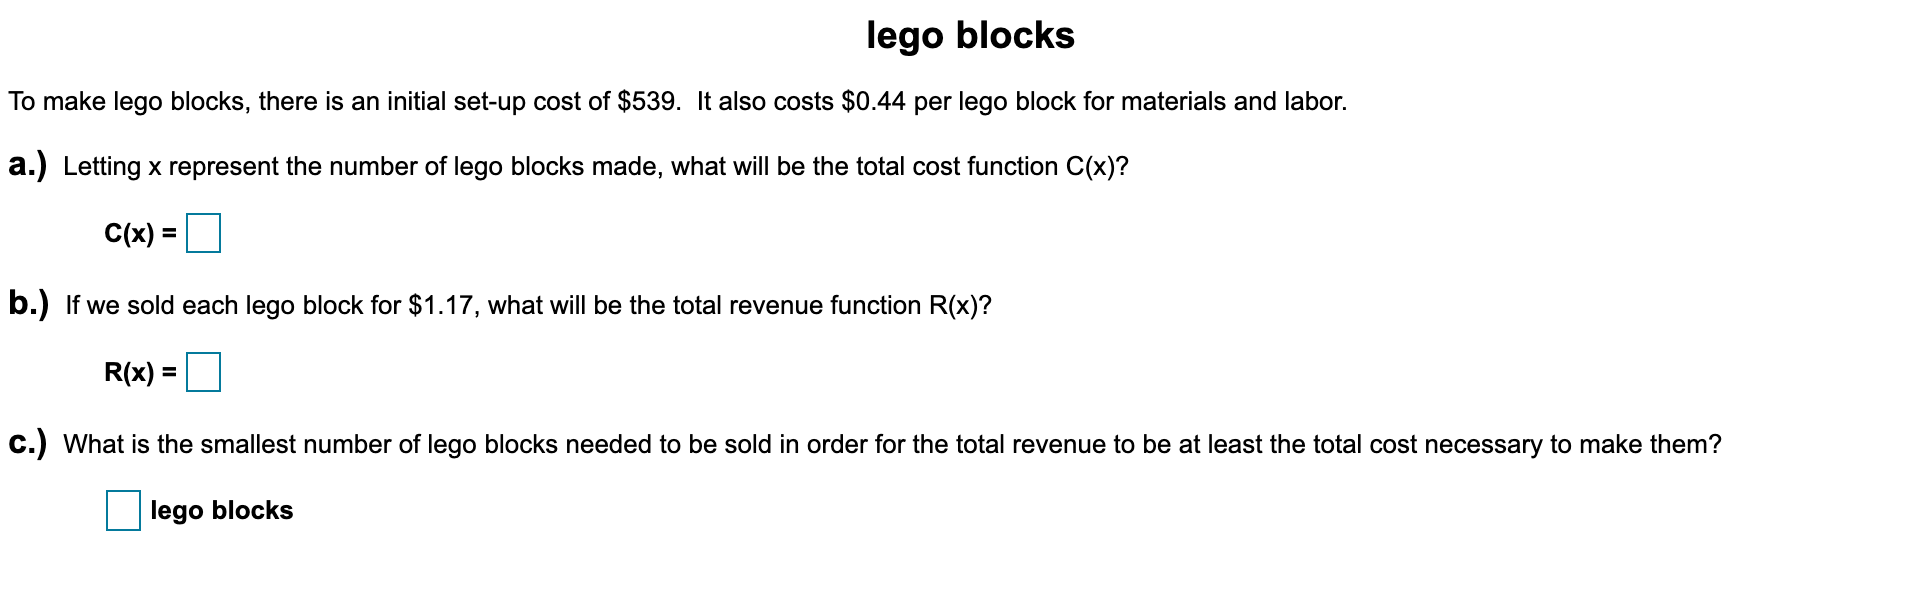 To make lego blocks, there is an initial set-up cost of $539. It also costs $0.44 per lego block for materials and labor.
a.) Letting x represent the number of lego blocks made, what will be the total cost function C(x)?
C(x) =
b.) If we sold each lego block for $1.17, what will be the total revenue function R(x)?
R(x)
%3D
c.) What is the smallest number of lego blocks needed to be sold in order for the total revenue to be at least the total cost necessary to make them?
lego blocks
